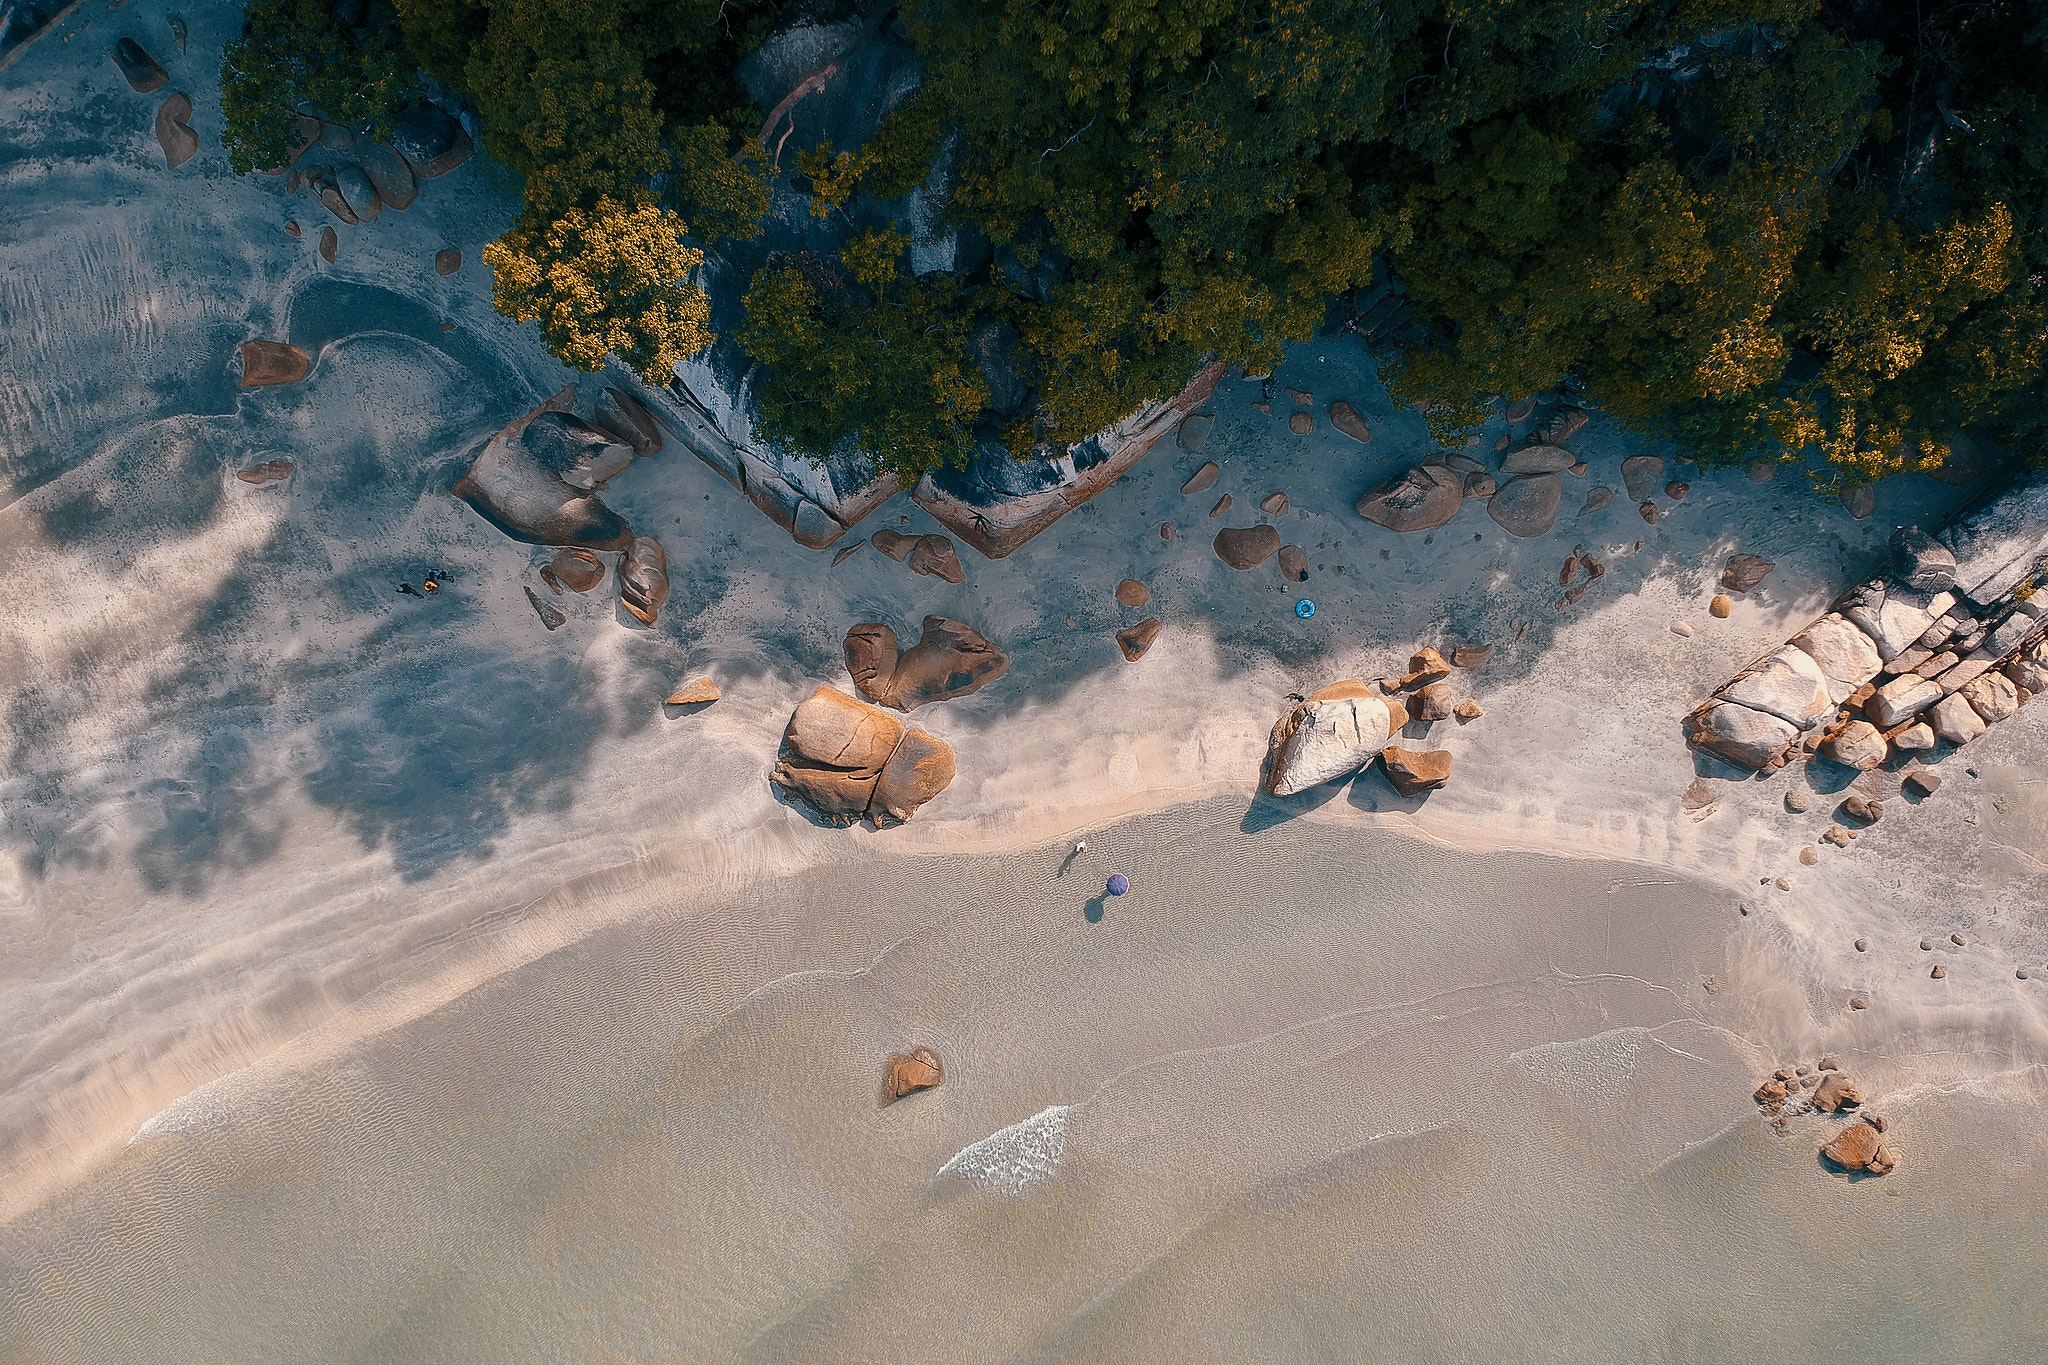 General 2048x1365 nature landscape aerial view trees sea beach stones sand forest rocks